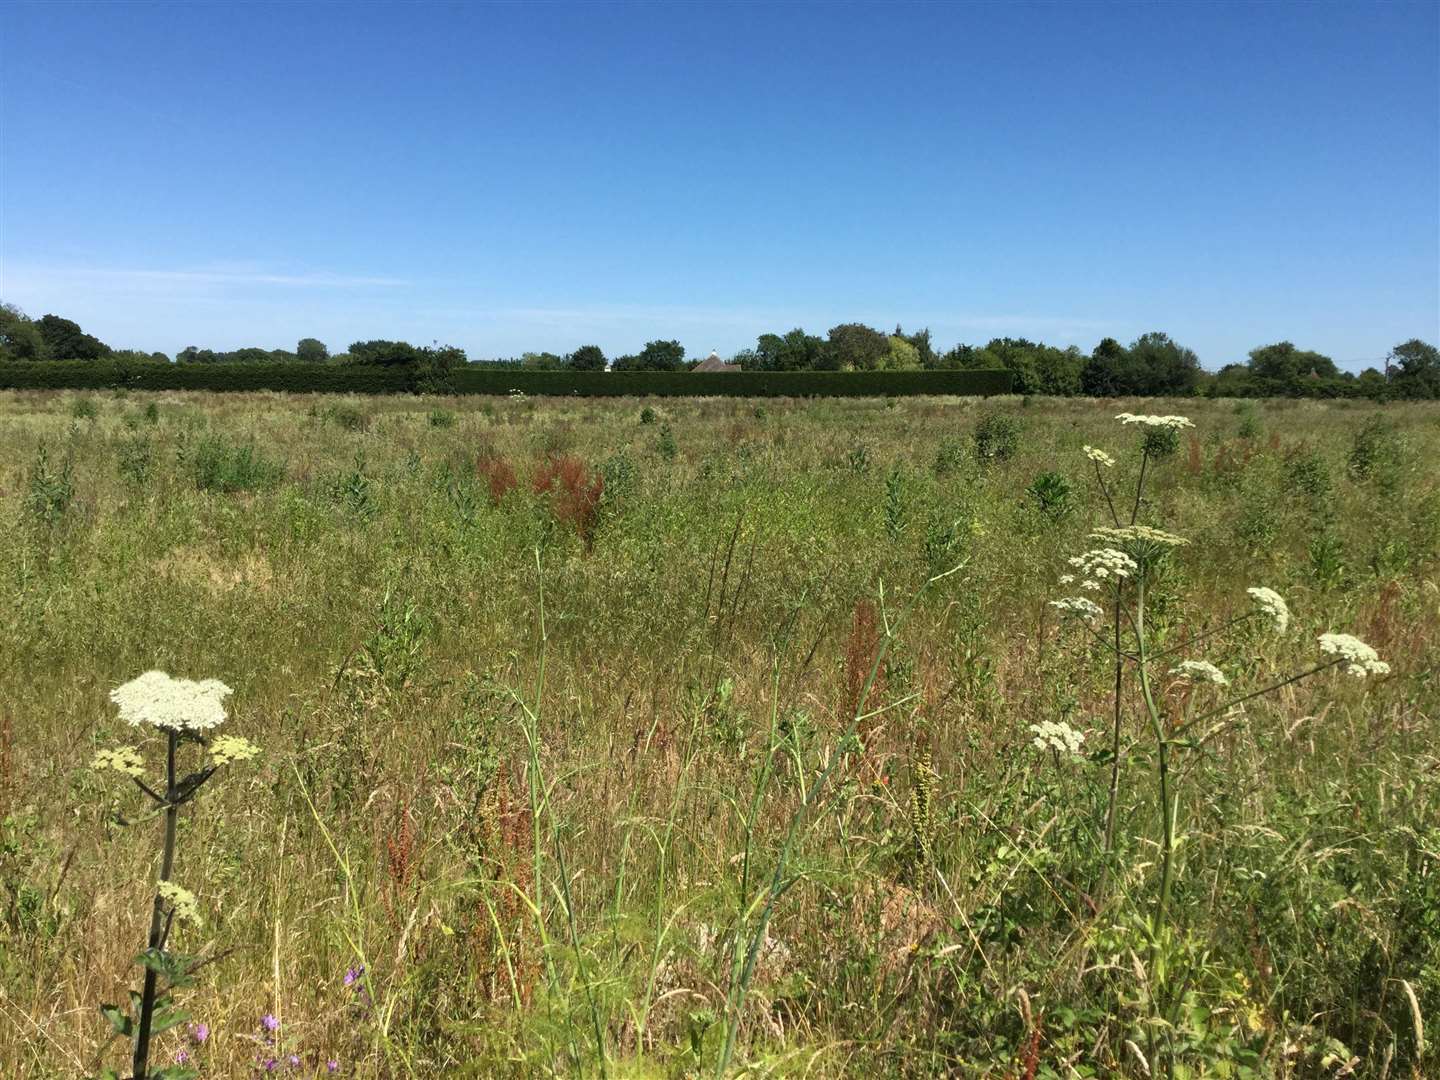 The farmland at Blean which Gladman wants to build 85 homes on